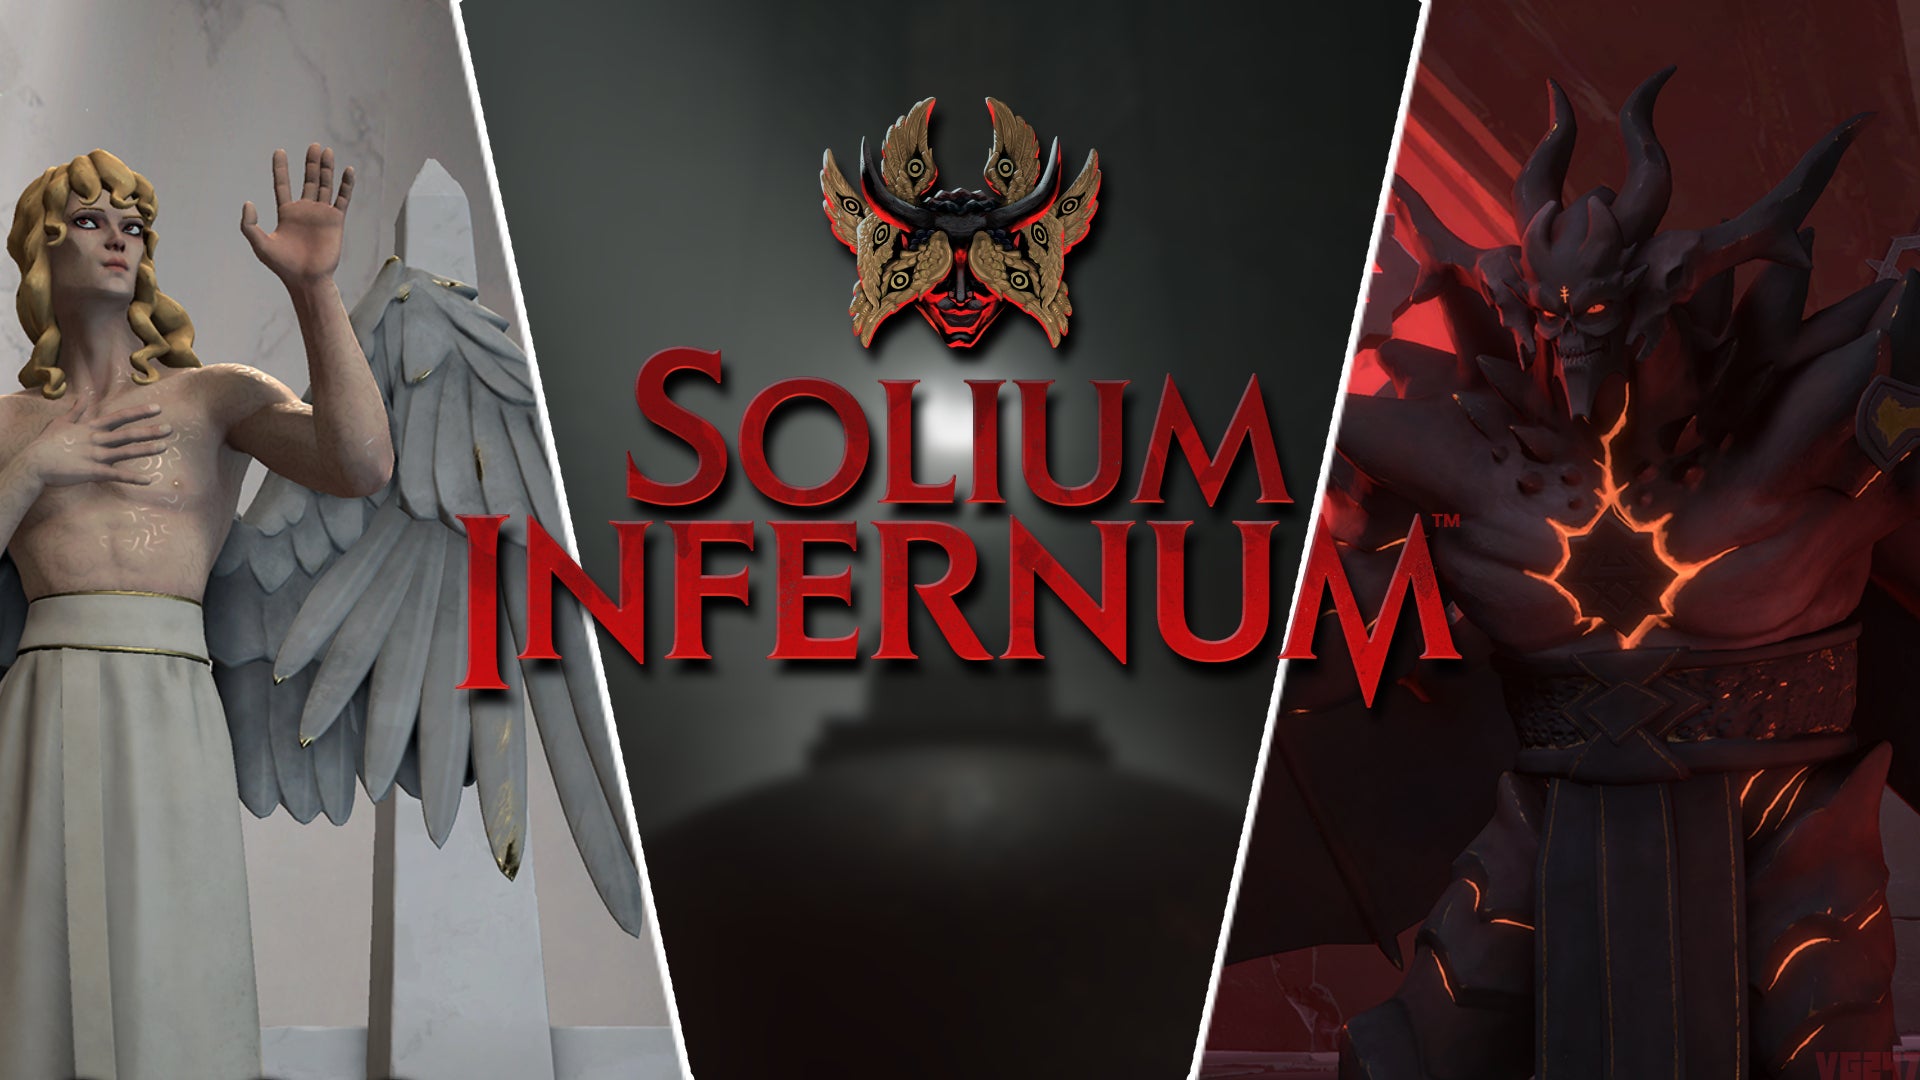 Solium Infernum returns from Hell as League of Geeks announces new title for 2023 launch day